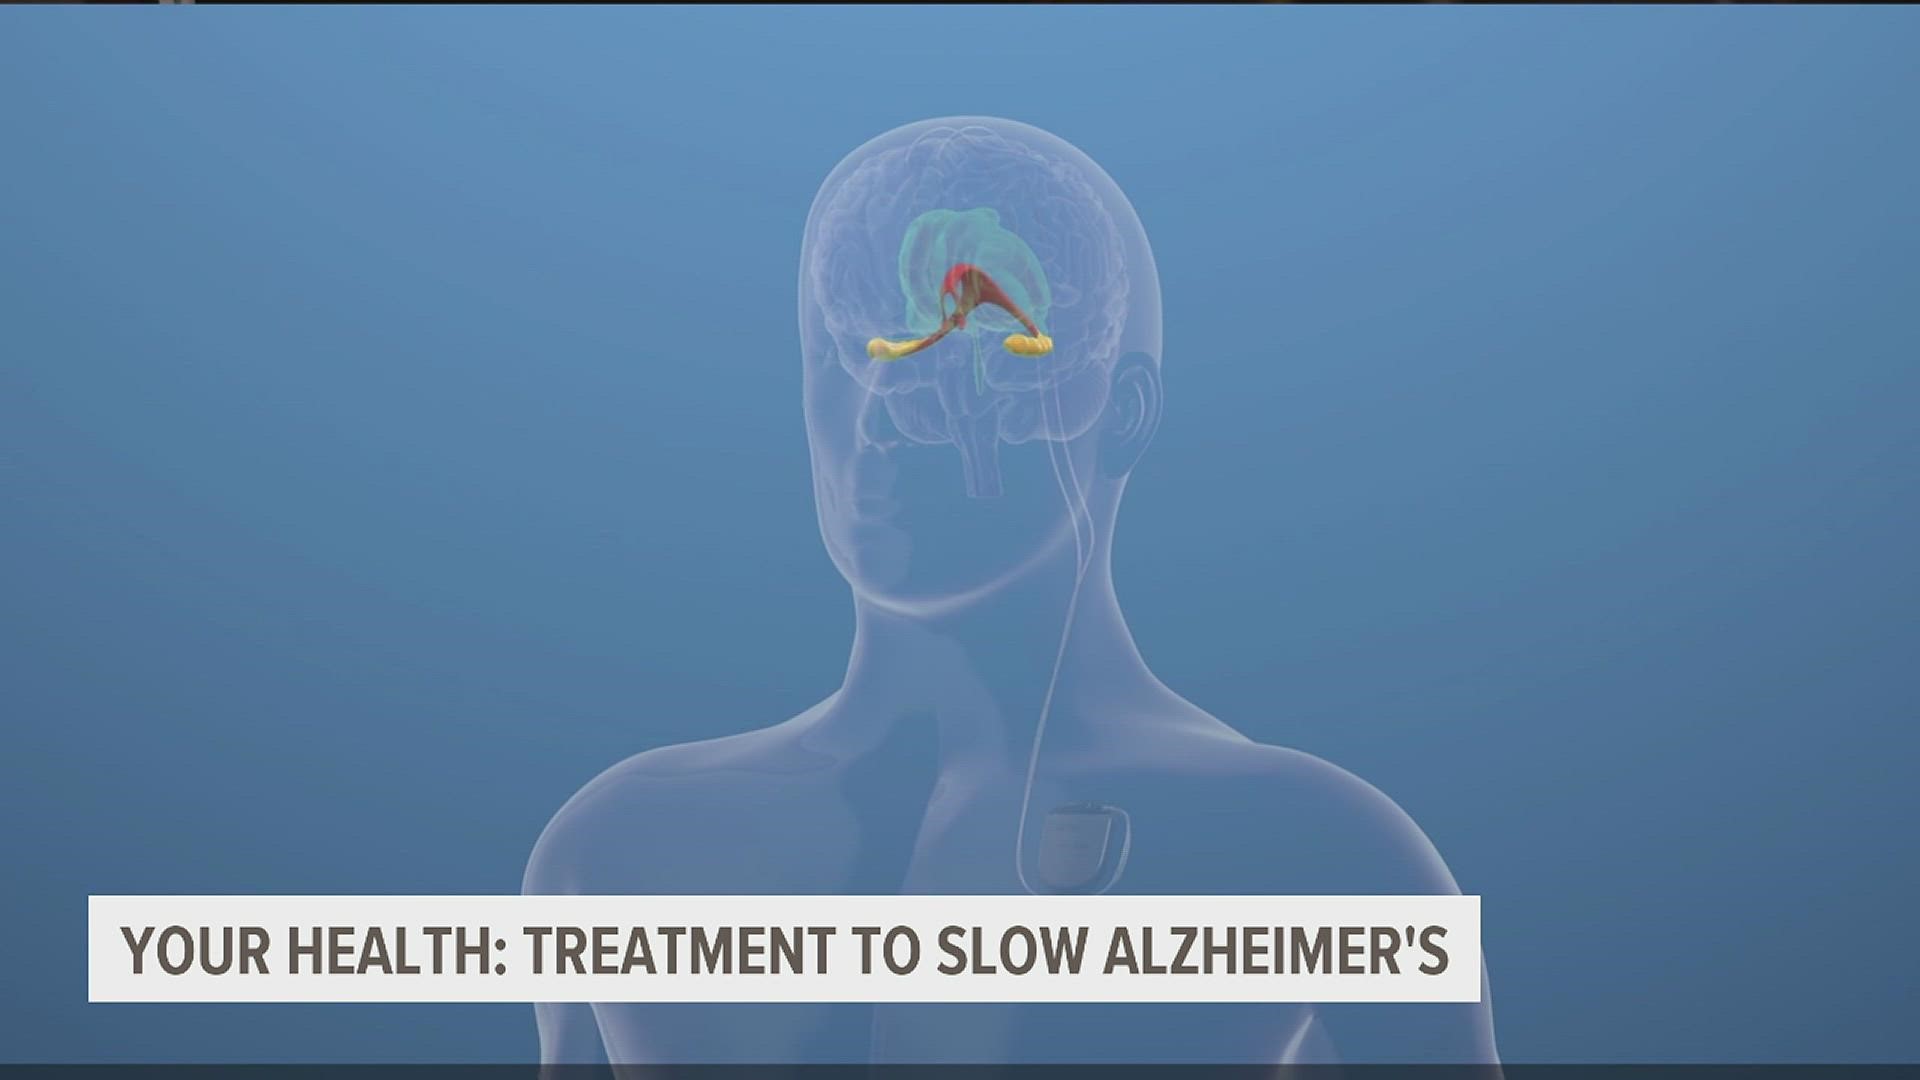 Health officials say the number of people living with Alzheimer's is expected to more than double in the next 30 years.